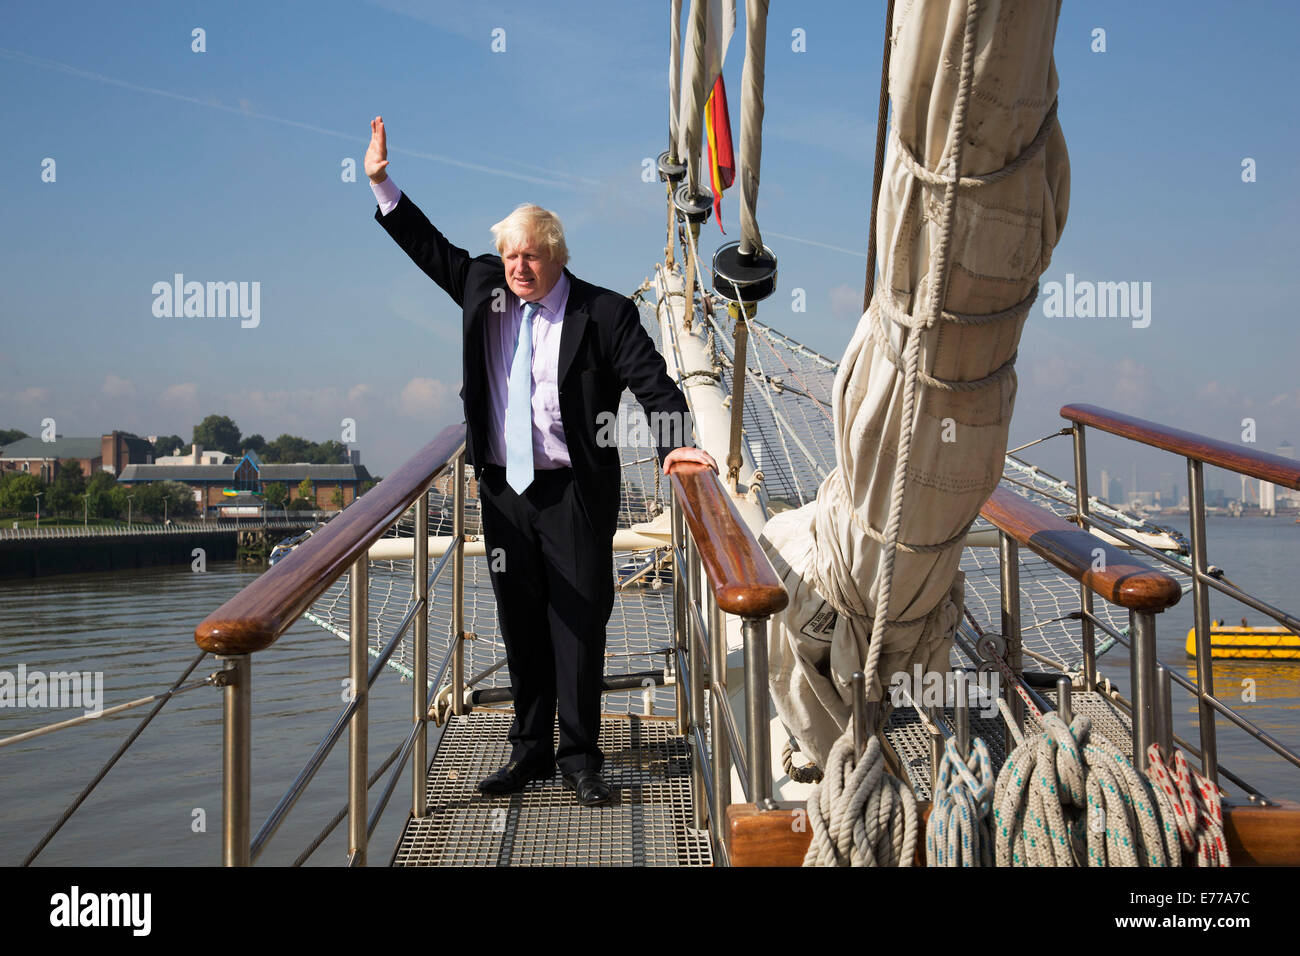 London, UK. 8th Sep, 2014. London Mayor Boris Johnson during a visit to Royal Greenwich Tall Ships Festival which is organized by RB Greenwich, aboard the vessel TS Tenacious. The Festival is included as a highlight of Totally Thames, the new month-long promotion of river and riverside events delivered by Thames Festival Trust. Credit:  Michael Kemp/Alamy Live News Stock Photo